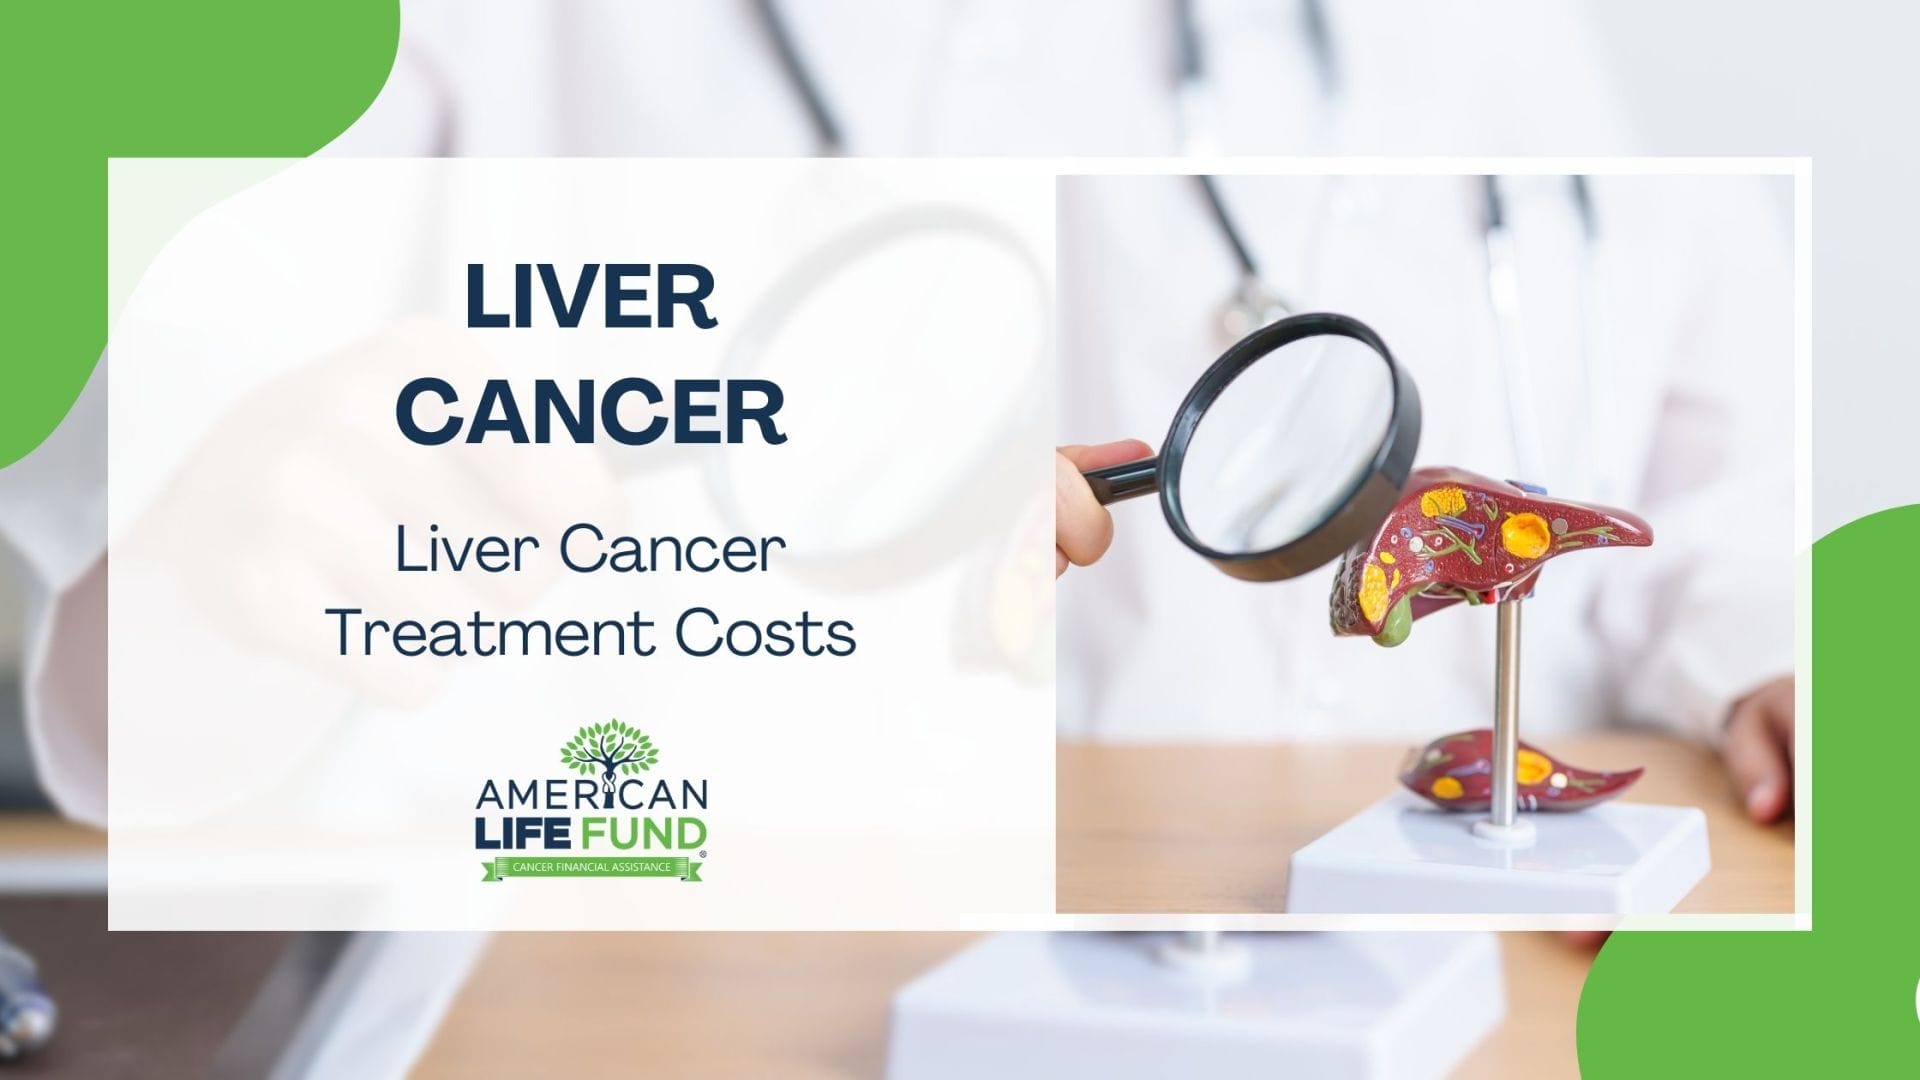 An informative blog header with a focus on financial aspects of healthcare, featuring a model of a liver with disease markers being examined through a magnifying glass, and the title 'Liver Cancer Treatment Costs' prominently displayed, alongside the logo of American Life Fund.